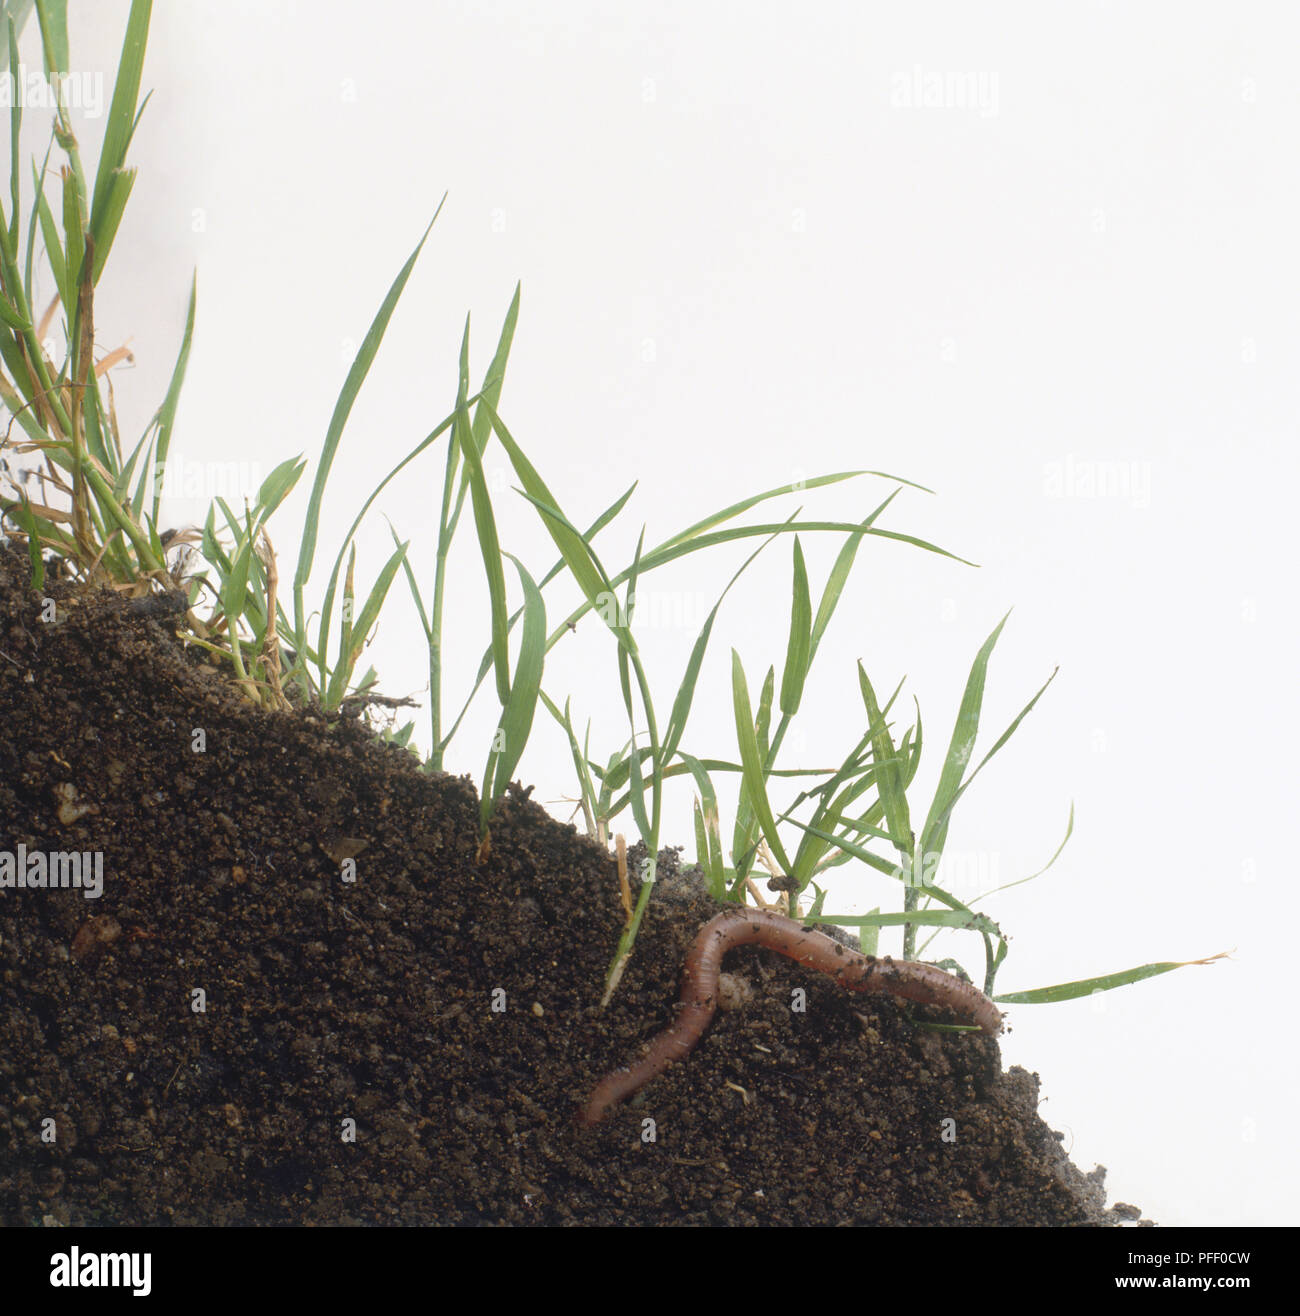 Earthworm partially submerged in soil Stock Photo